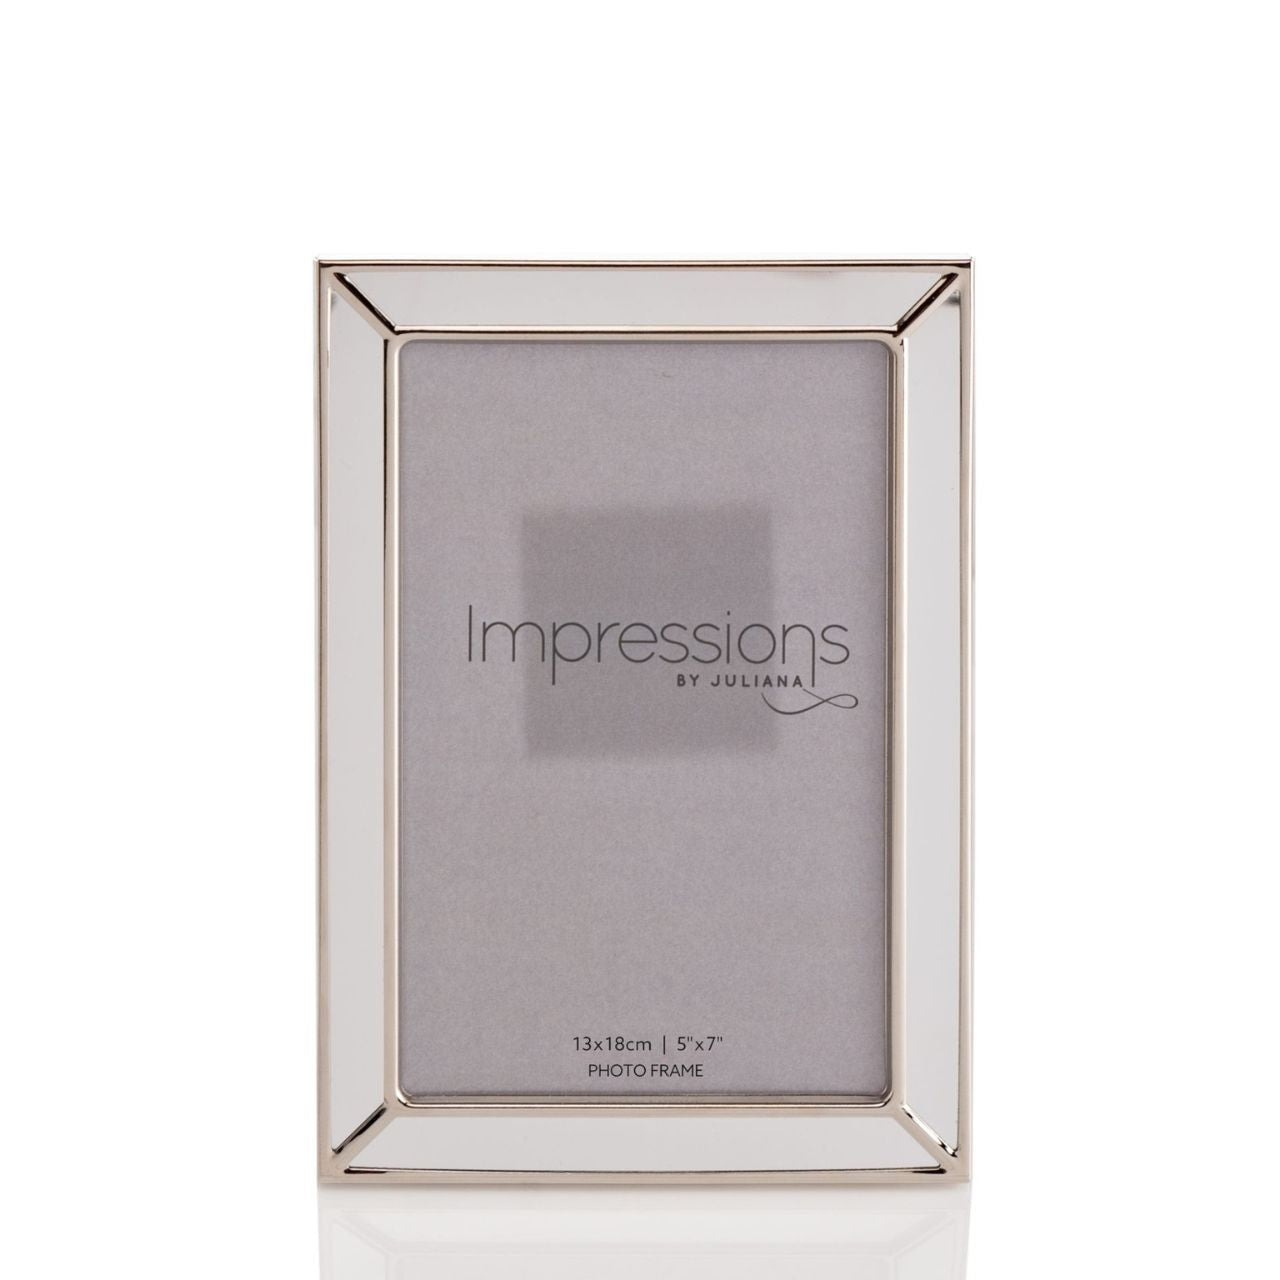 Silver & Mirrored Photo Frame 5" x 7"  With an uncomplicated design, this photo frame brings a classic timeless touch, suitable for any interior theme.